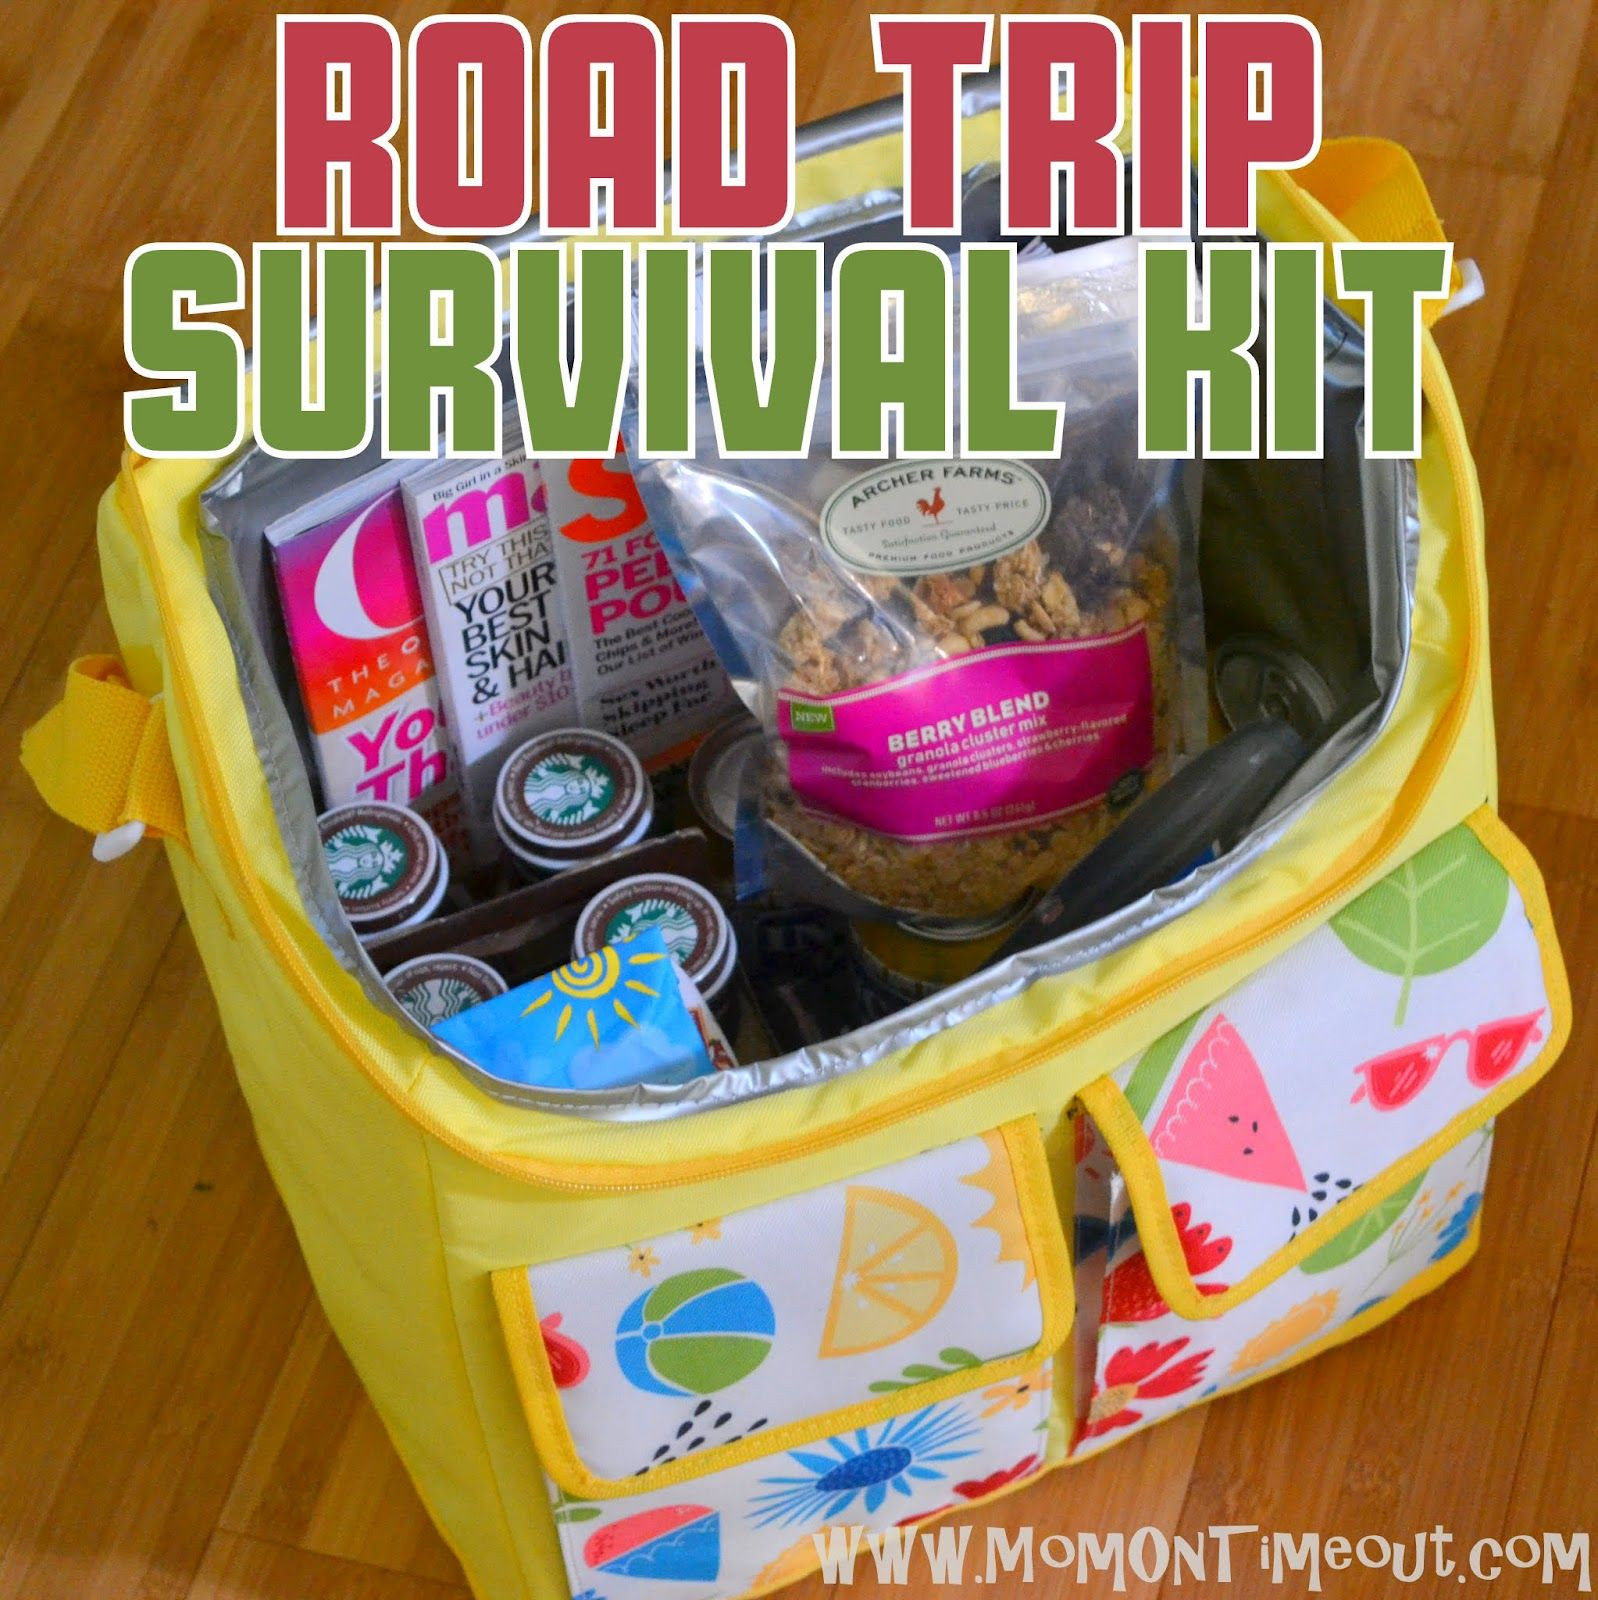 Car Travel Gift Basket Ideas
 This kit is packed full of everything you need to survive